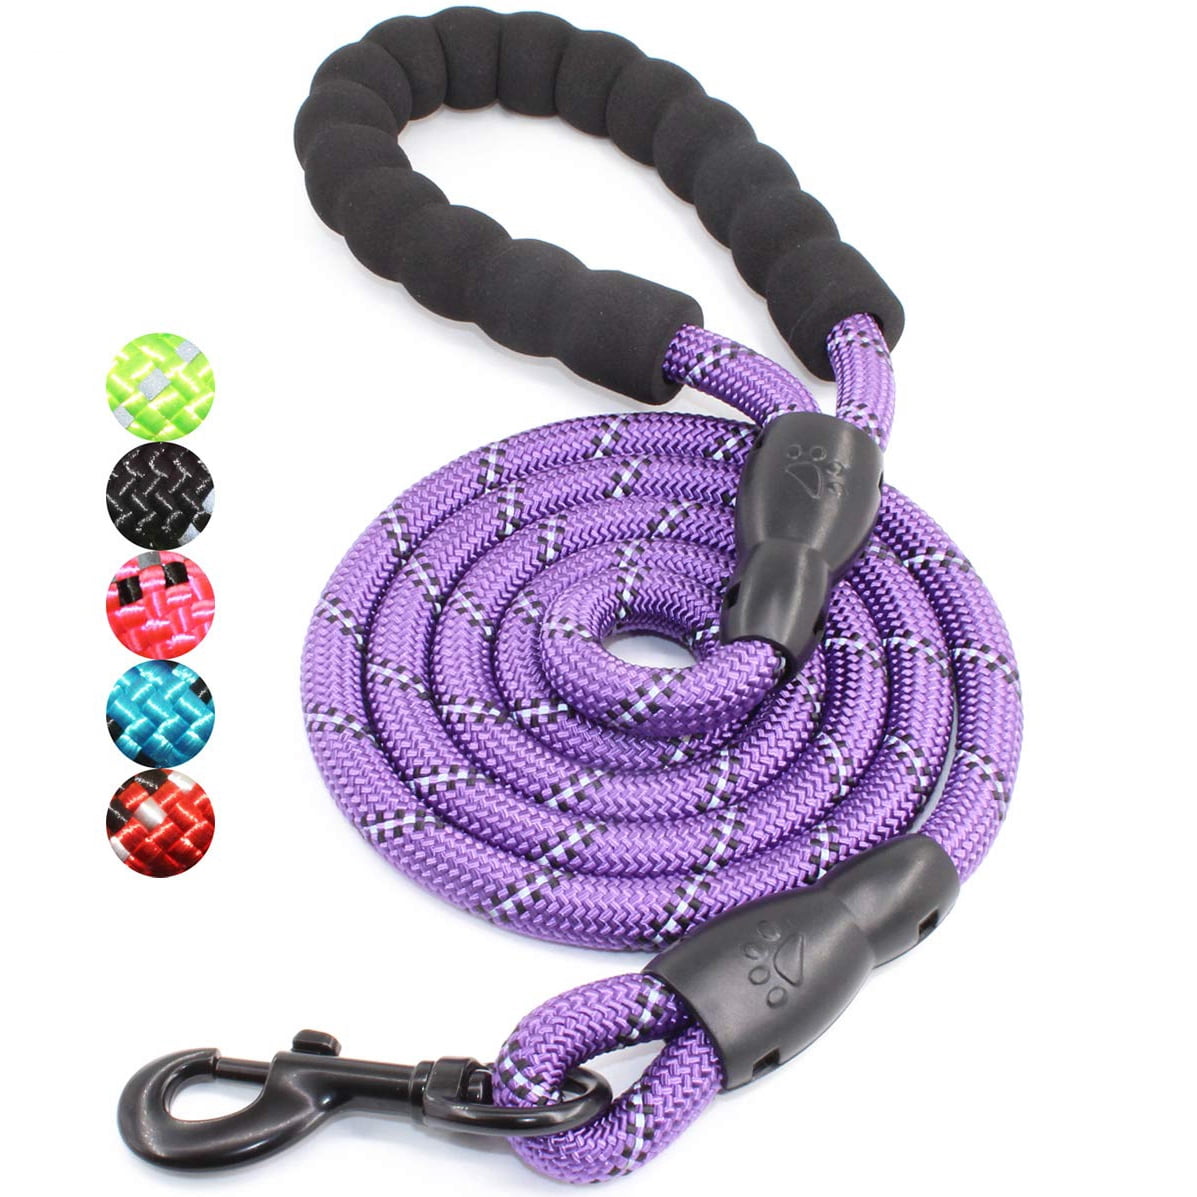 Large Dog Show Leads Clip 40 inches Braided Paracord Very Strong 